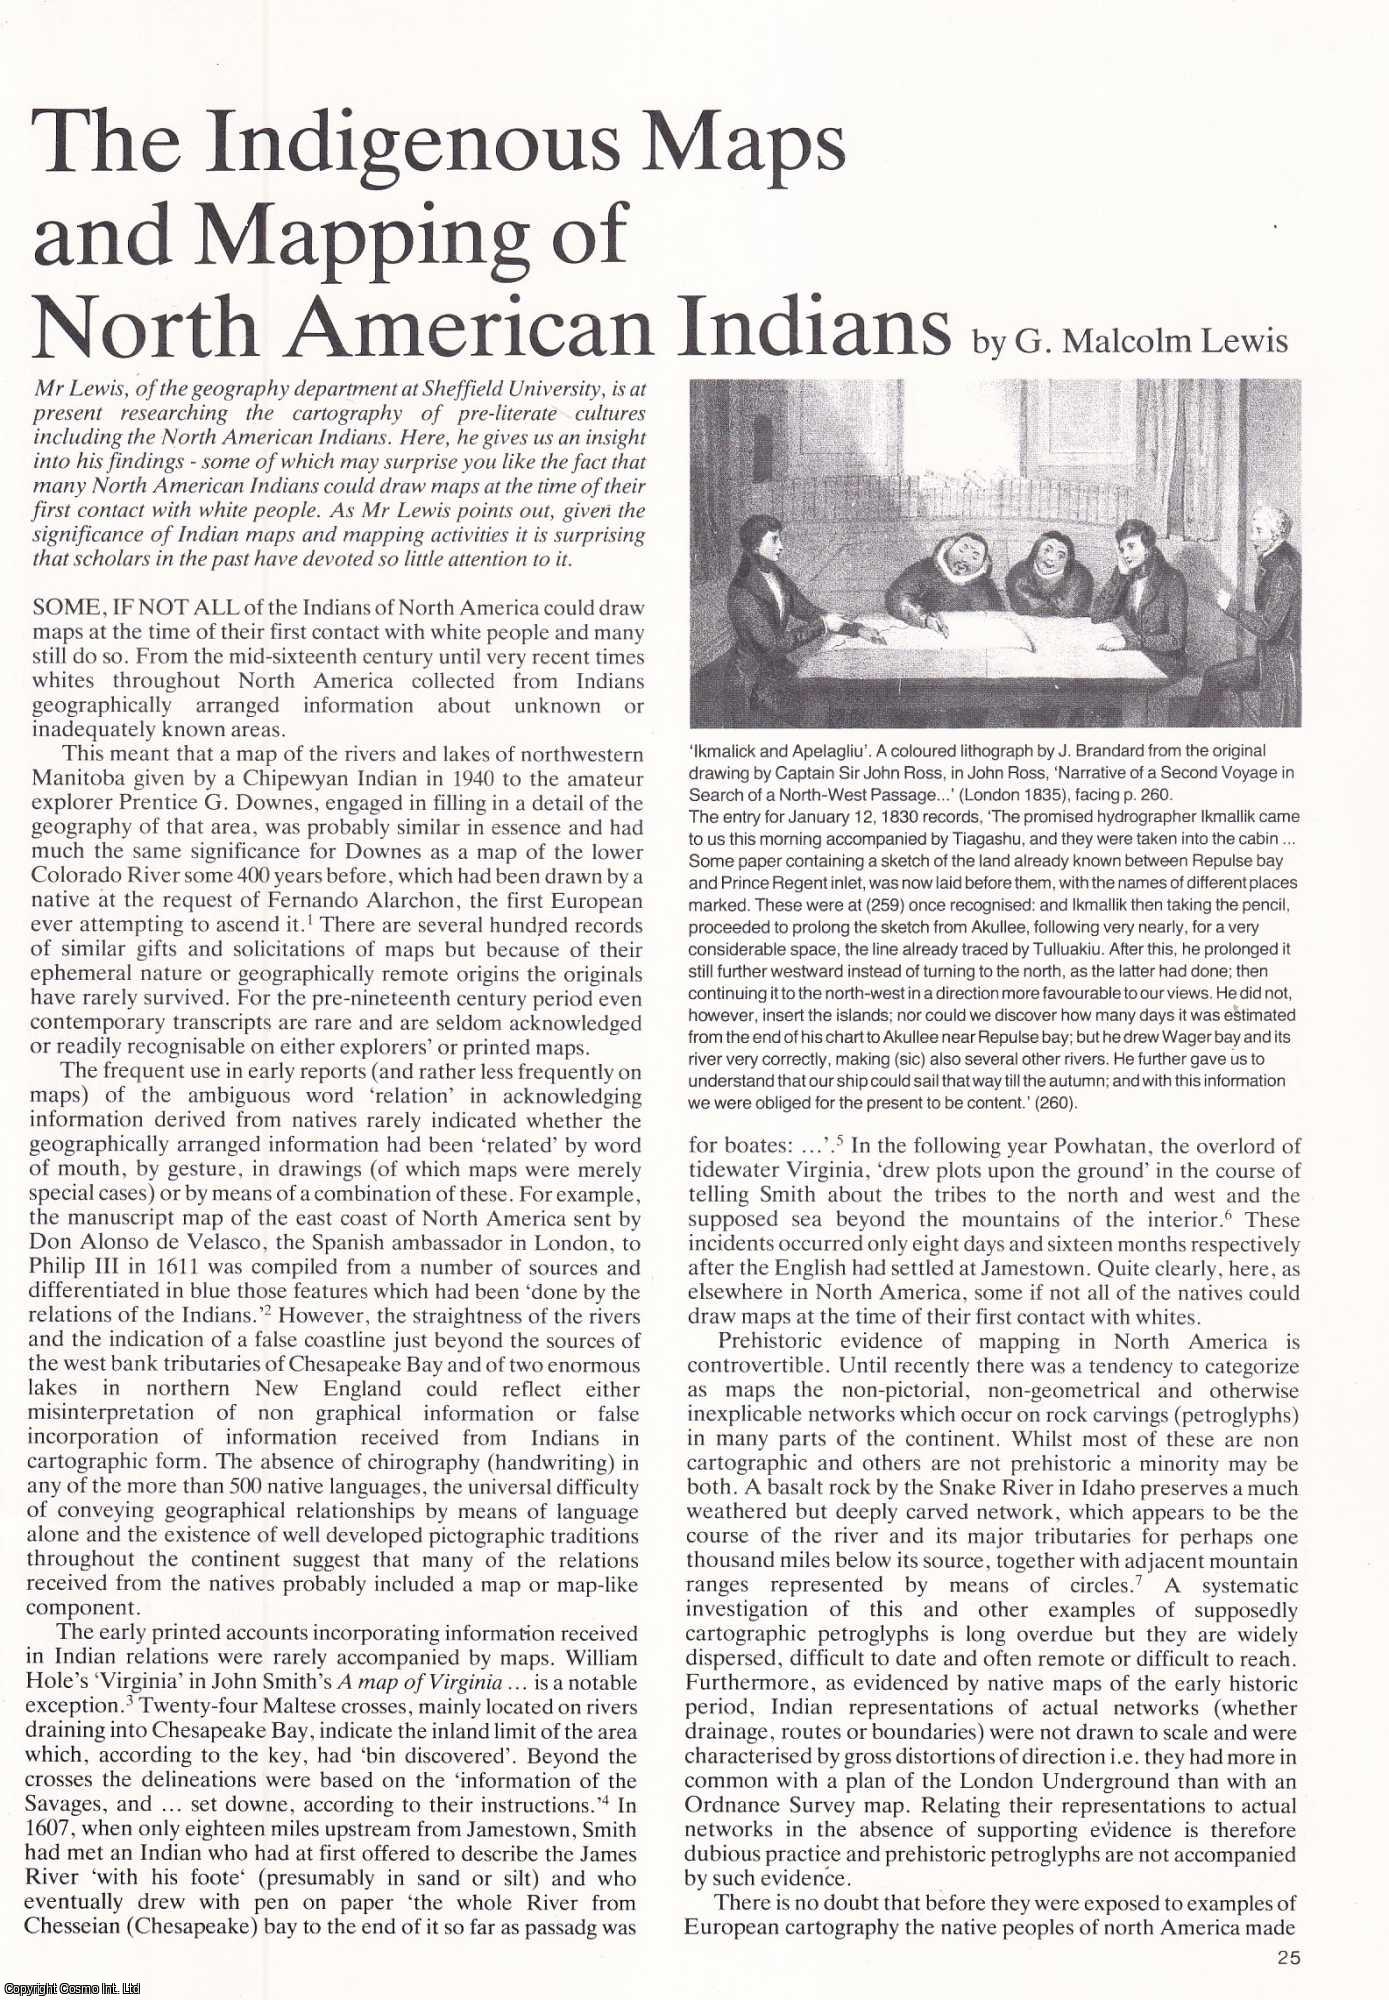 G. Malcolm Lewis - The Indigenous Maps and Mapping of North American Indians. An original article from Map Collector Magazine, 1979.